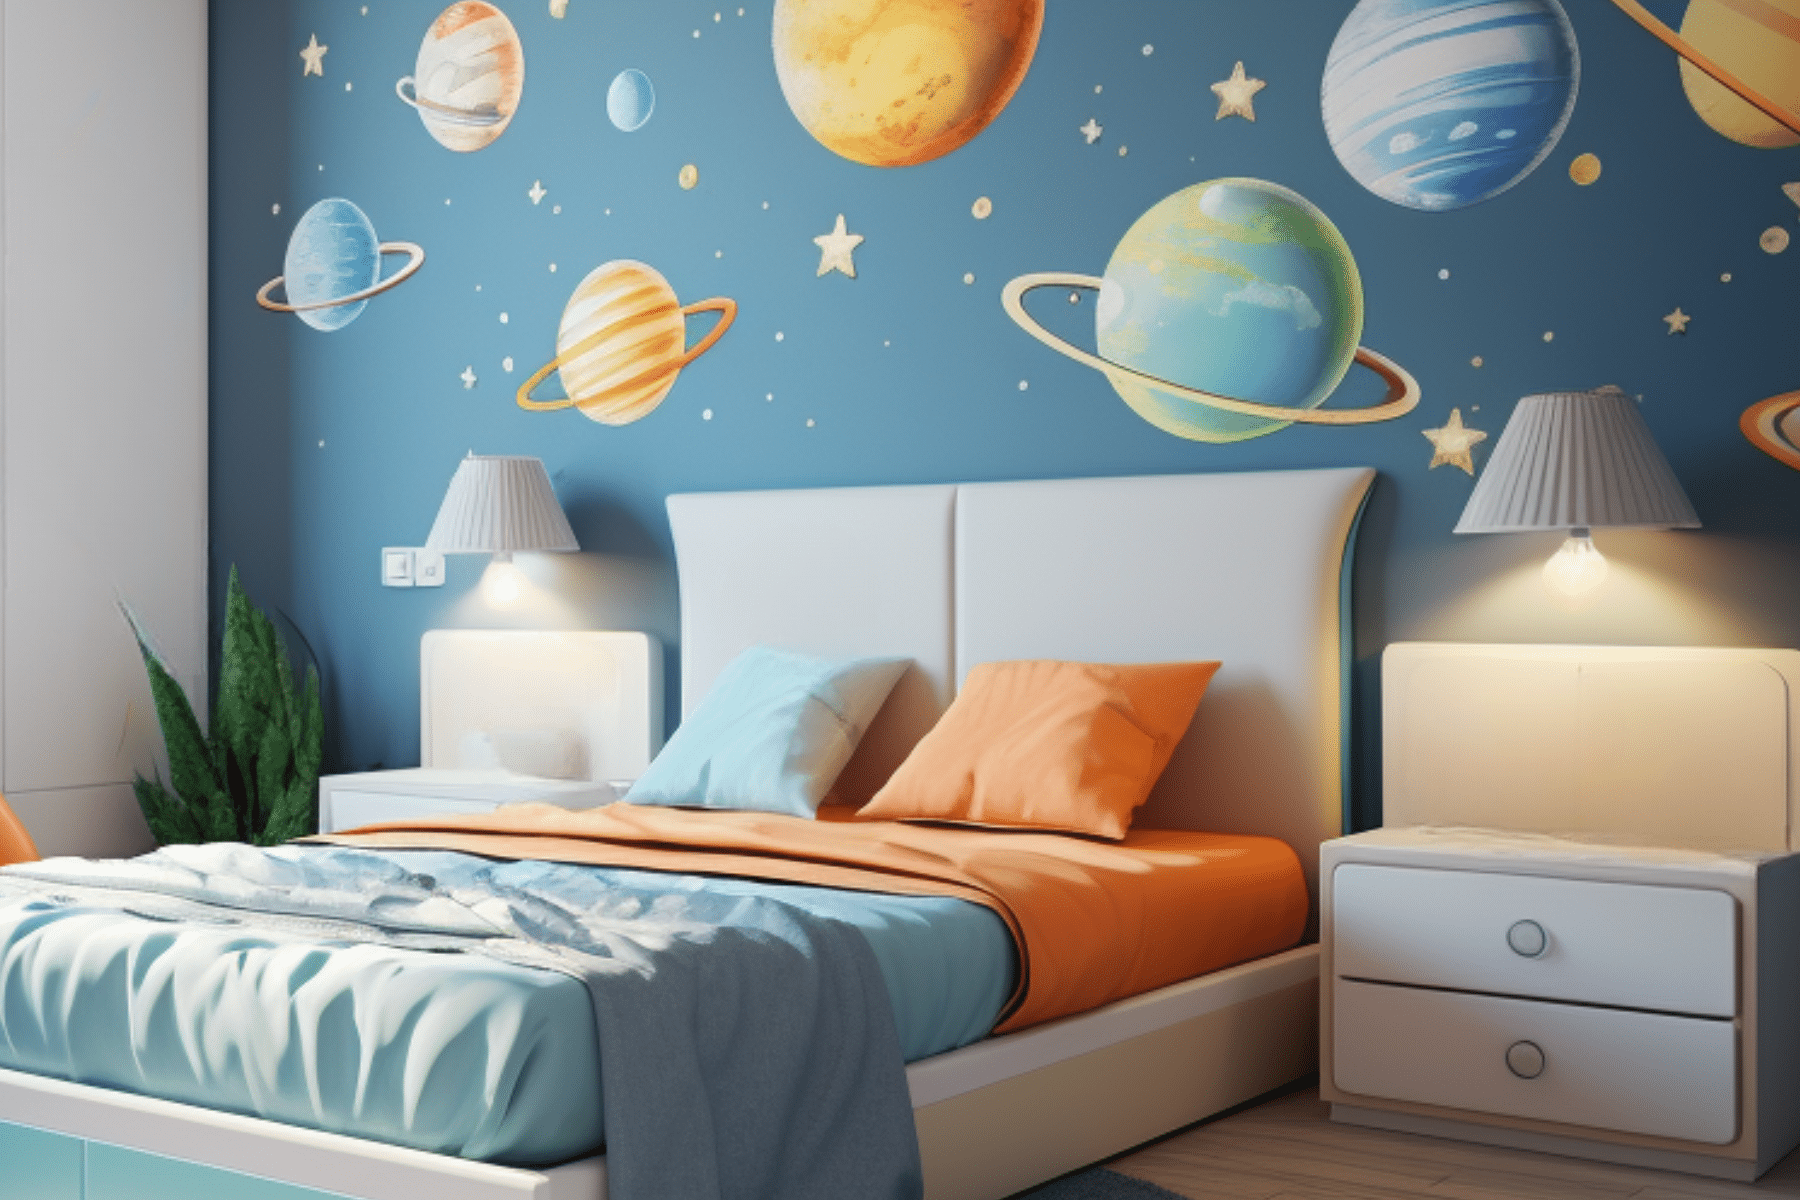 space bedroom ideas with planets on walls